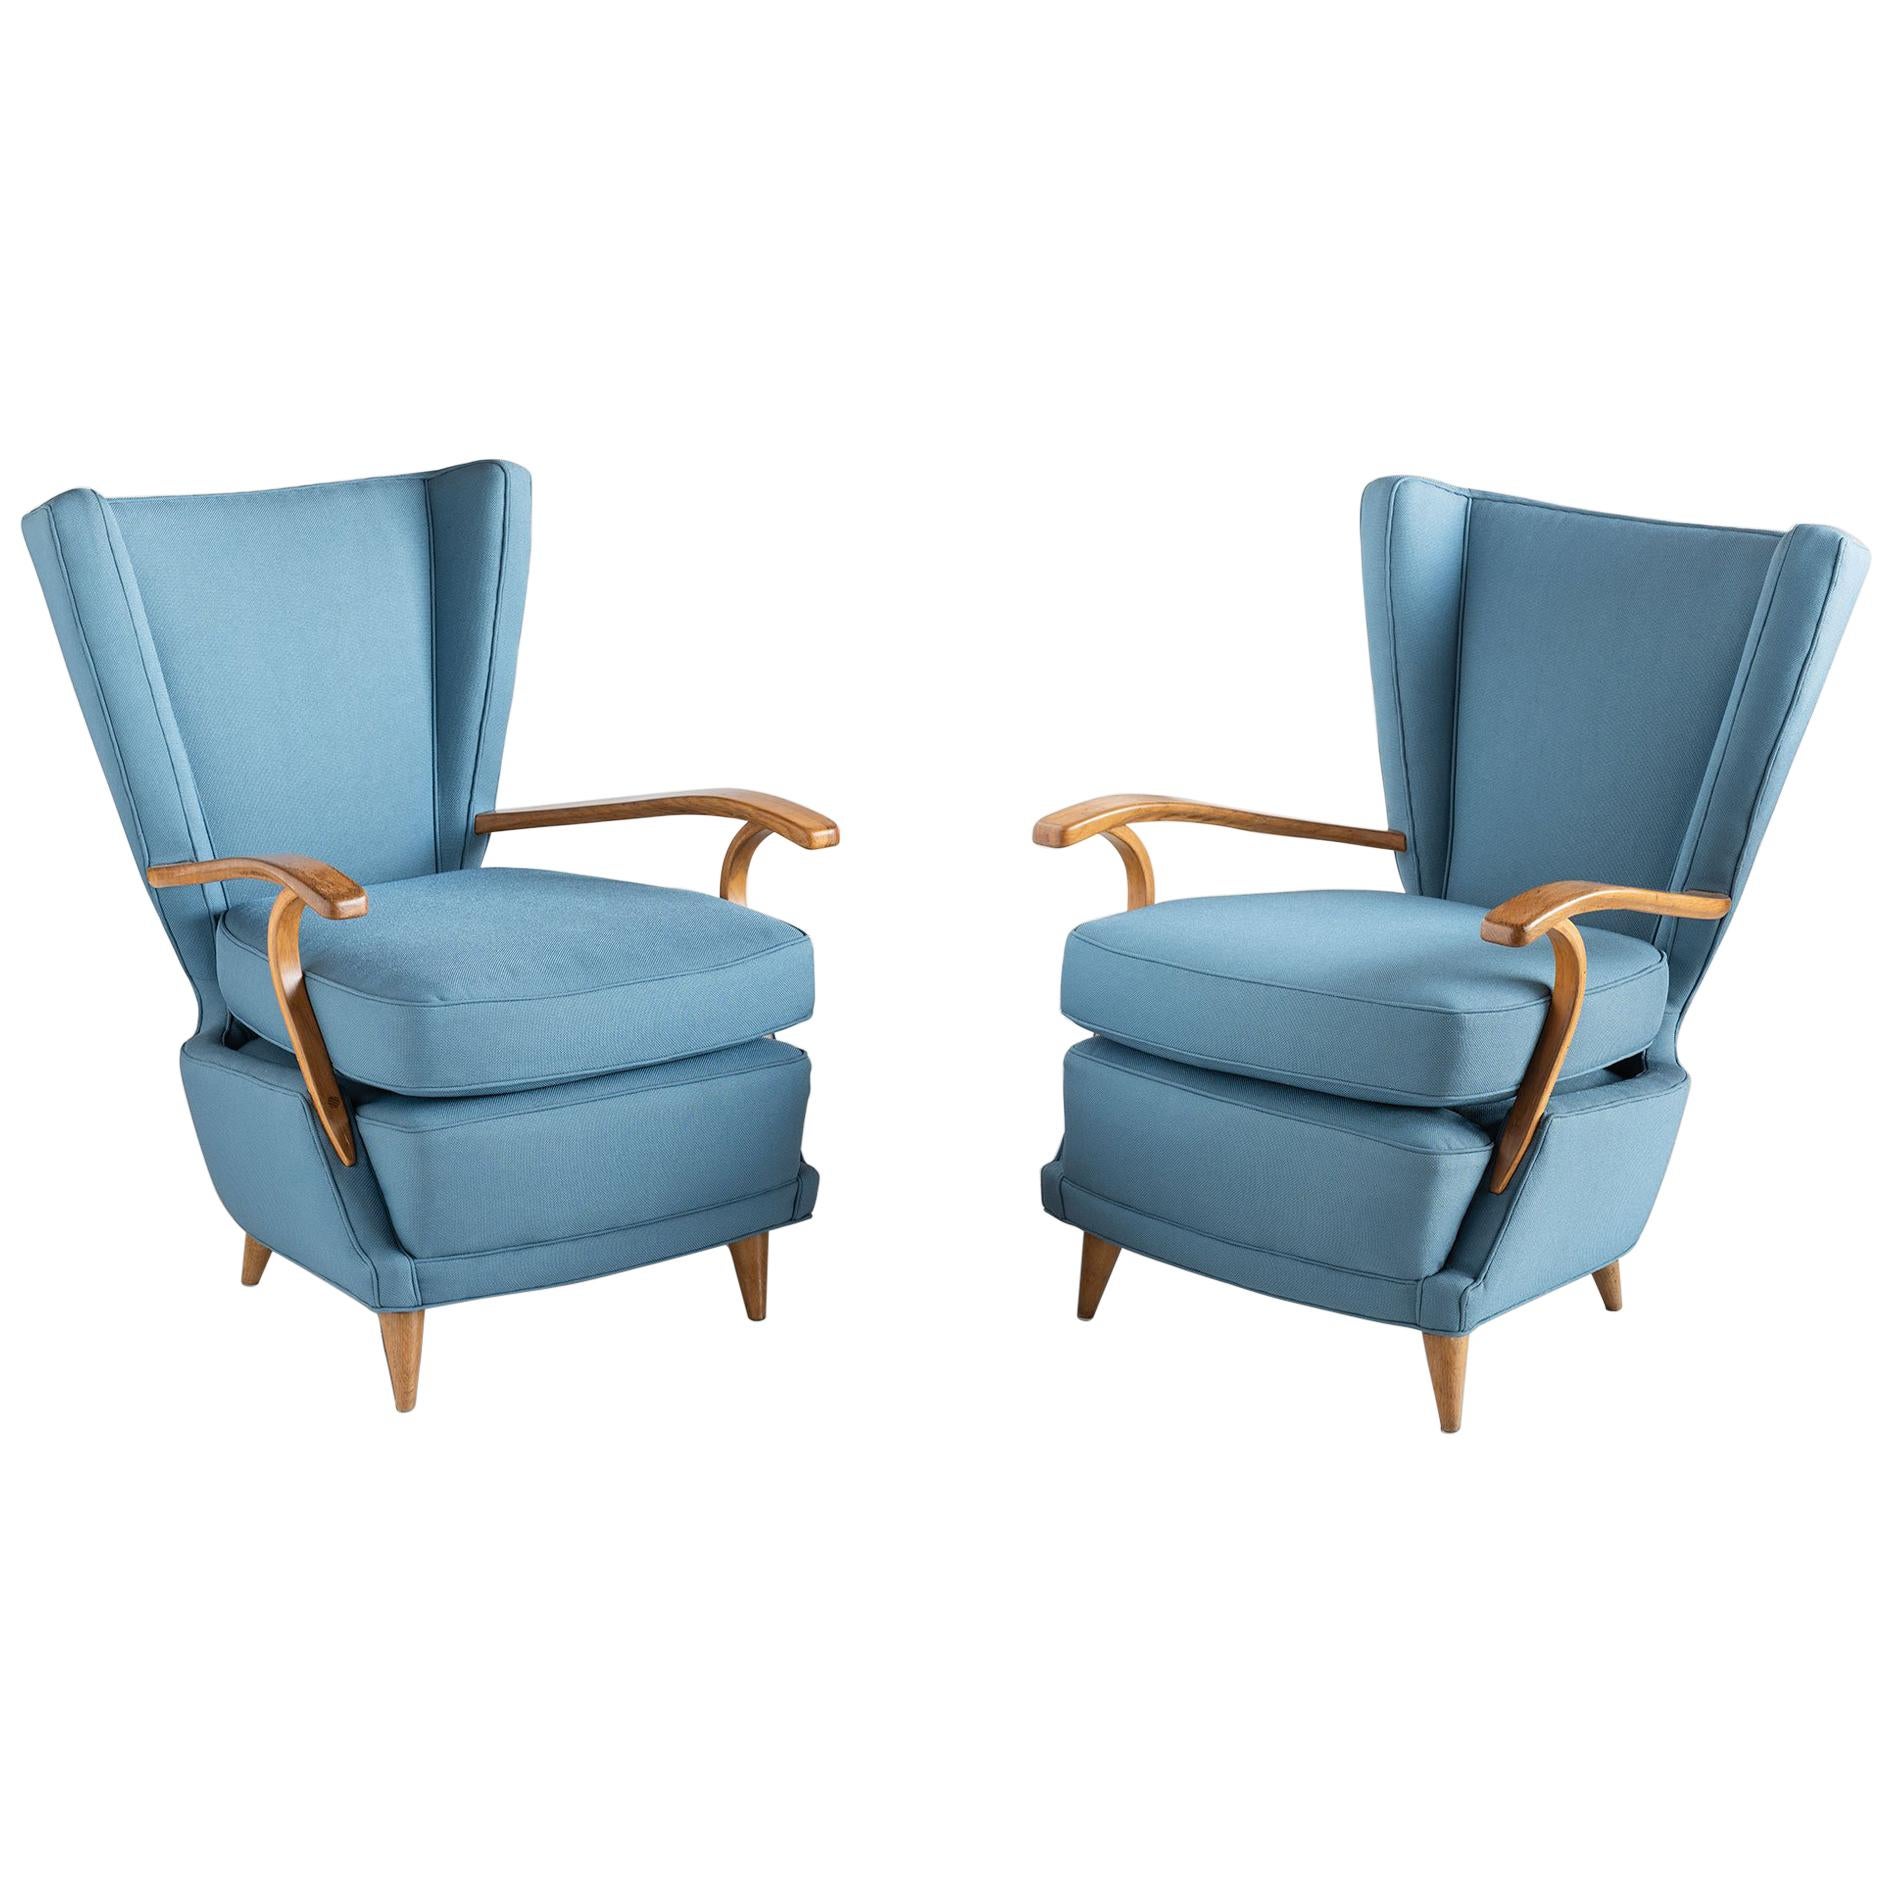 Pair of Curved Plywood Armchairs, Italy, circa 1950